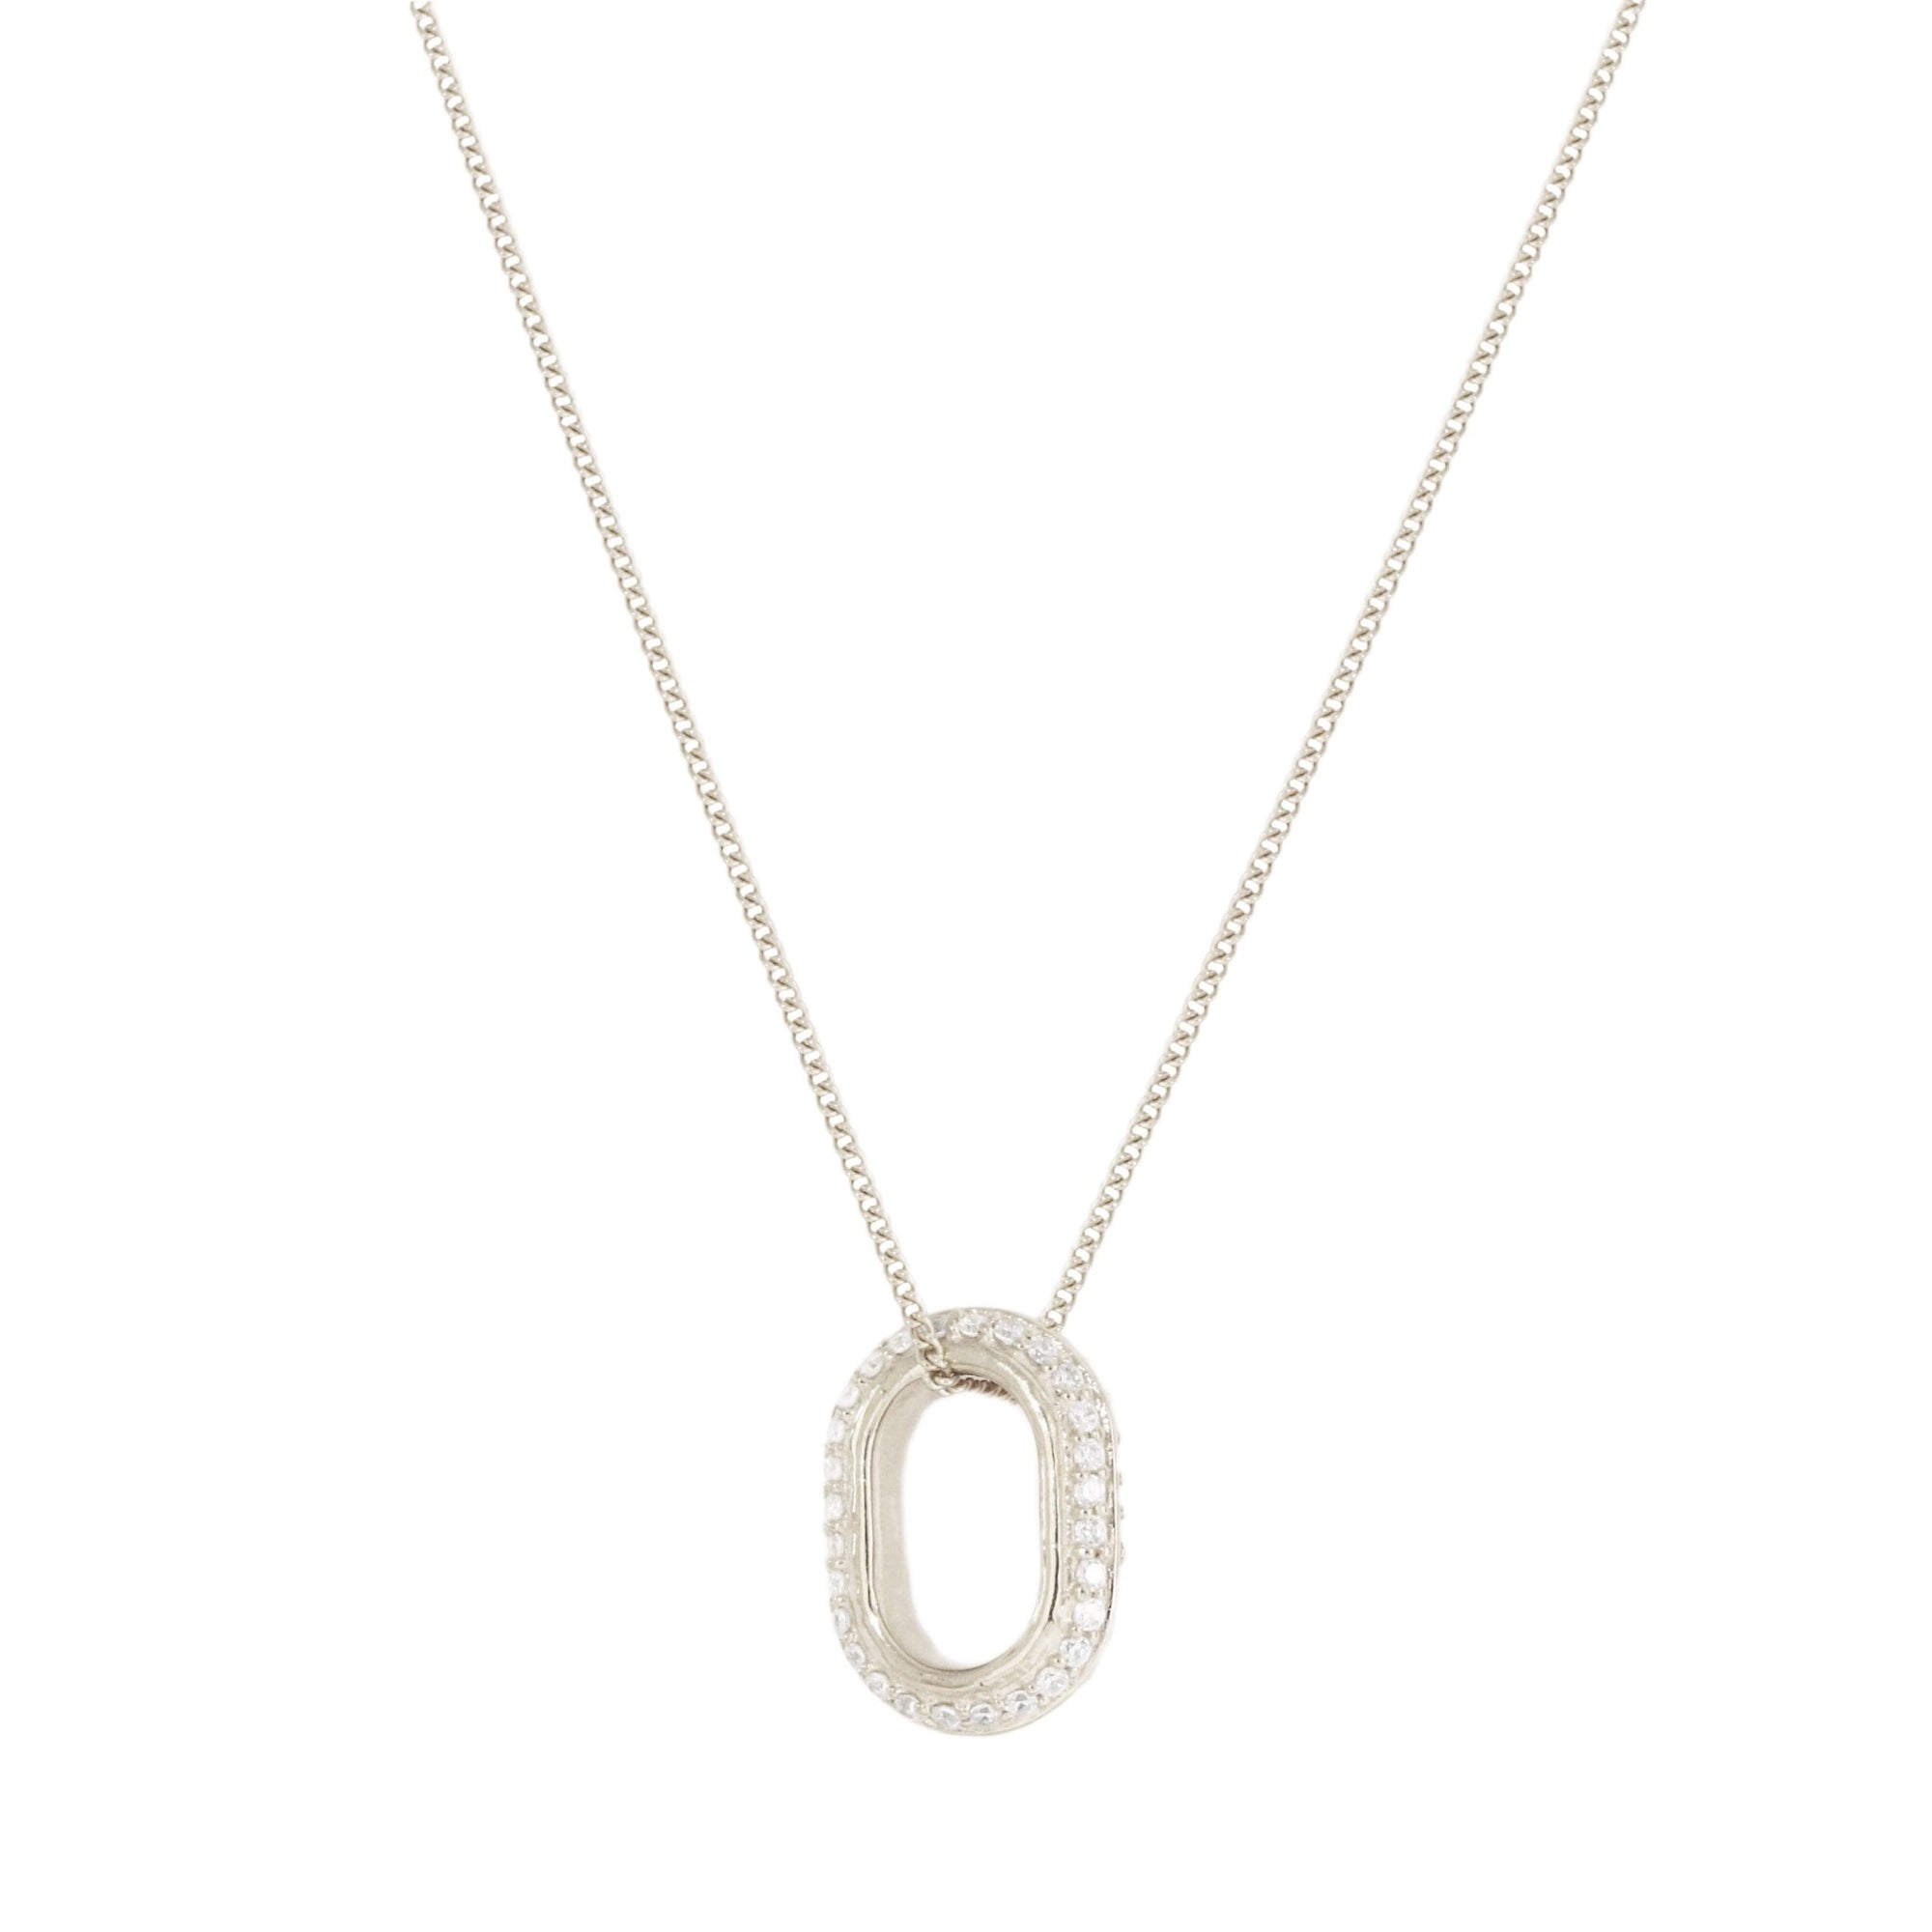 LOVE ETERNITY OVAL PENDANT NECKLACE - CUBIC ZIRCONIA & SILVER - SO PRETTY CARA COTTER